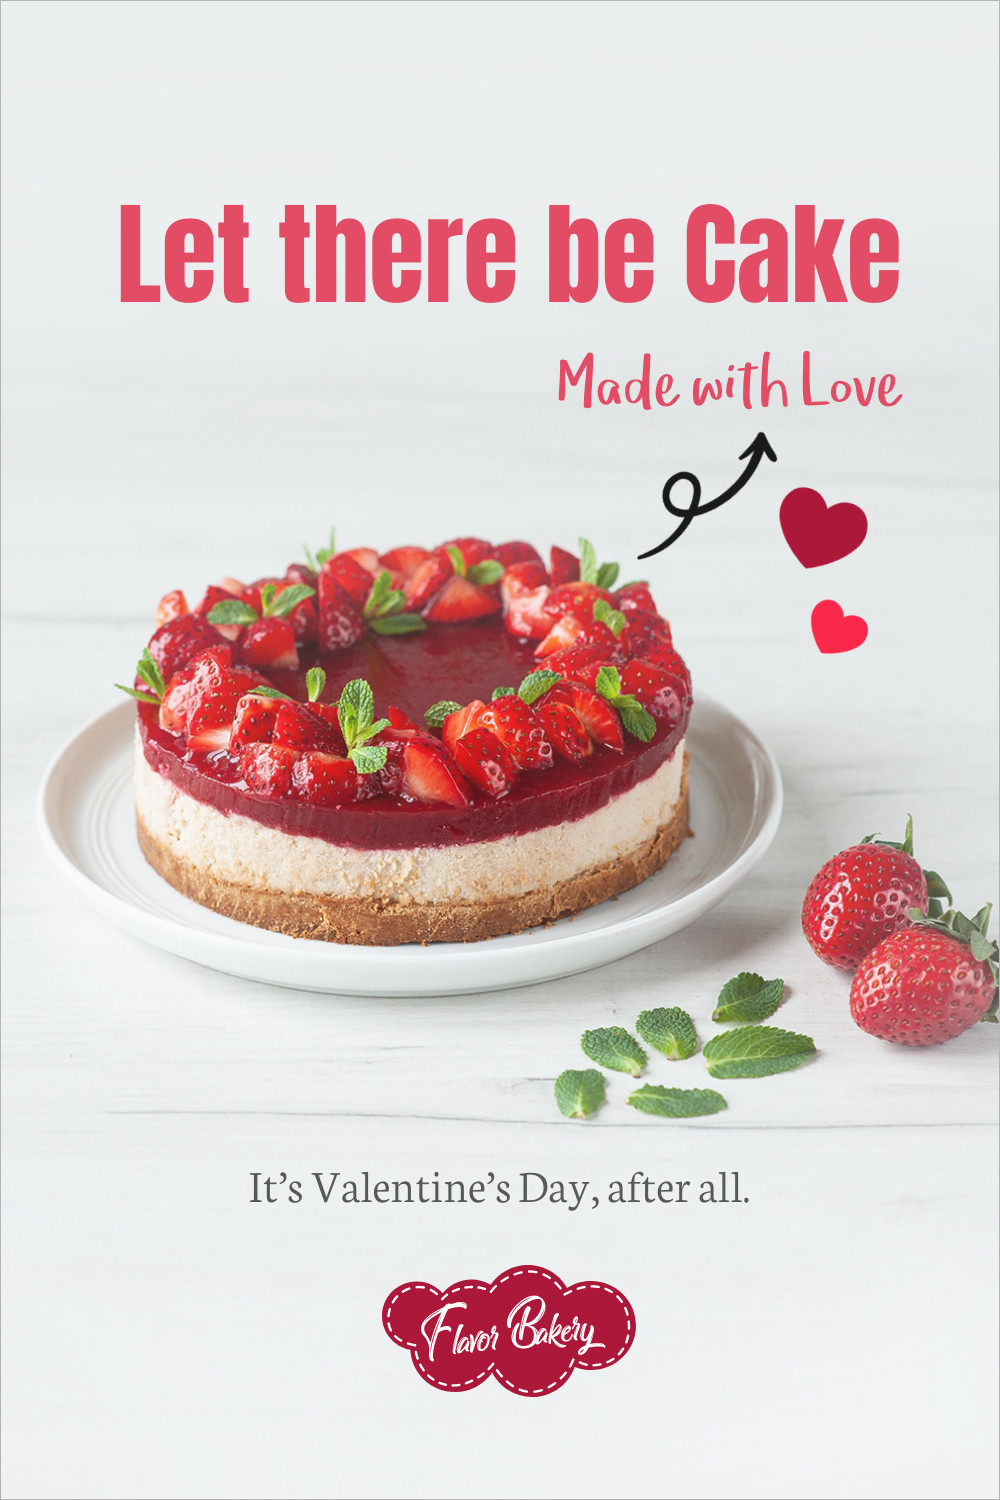 Let There Be Cake on Valentine's Day